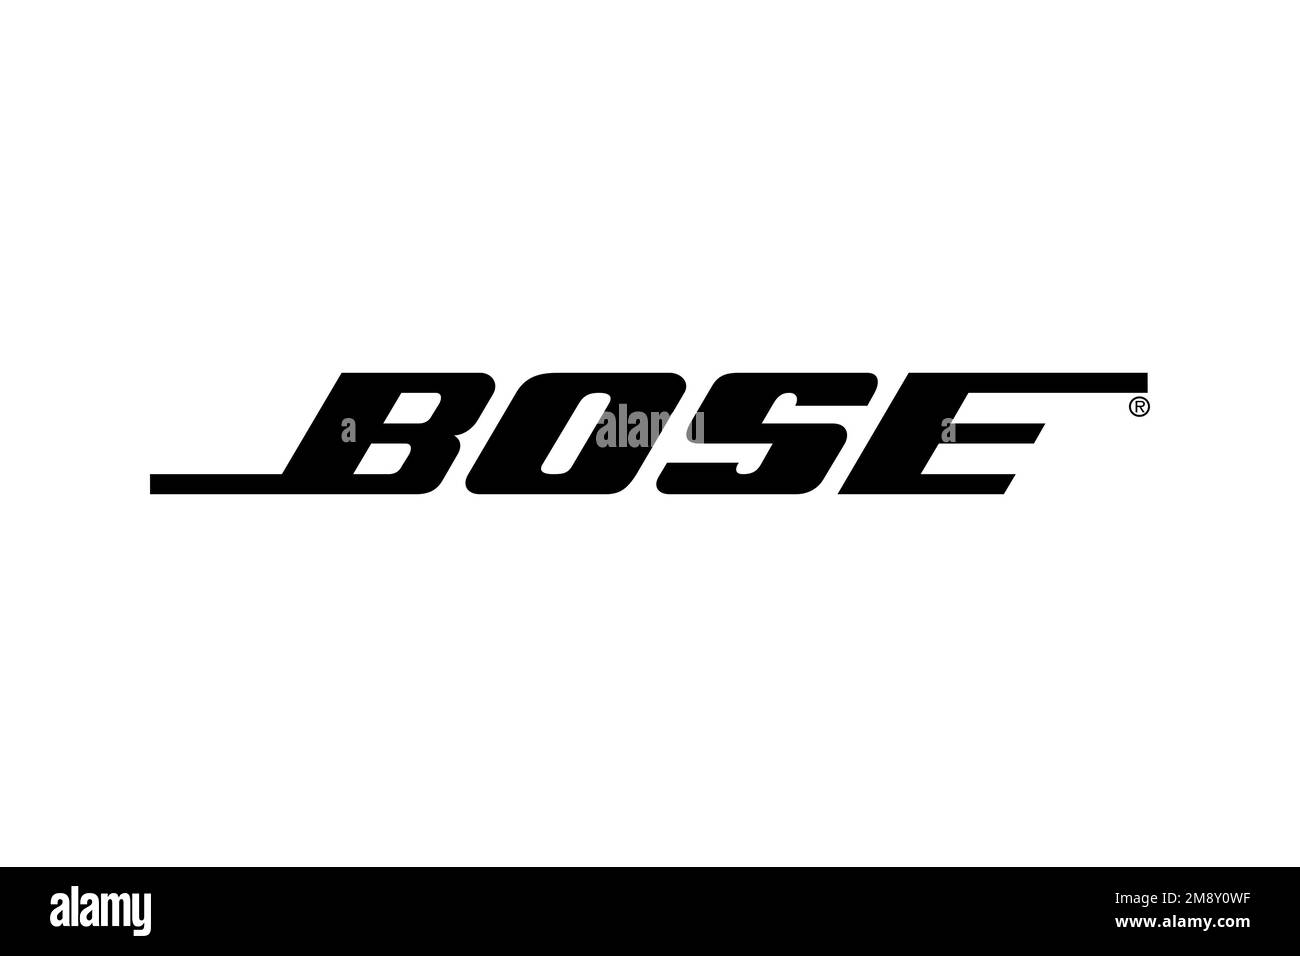 Bose corporation Black and White Stock Photos Images - Alamy